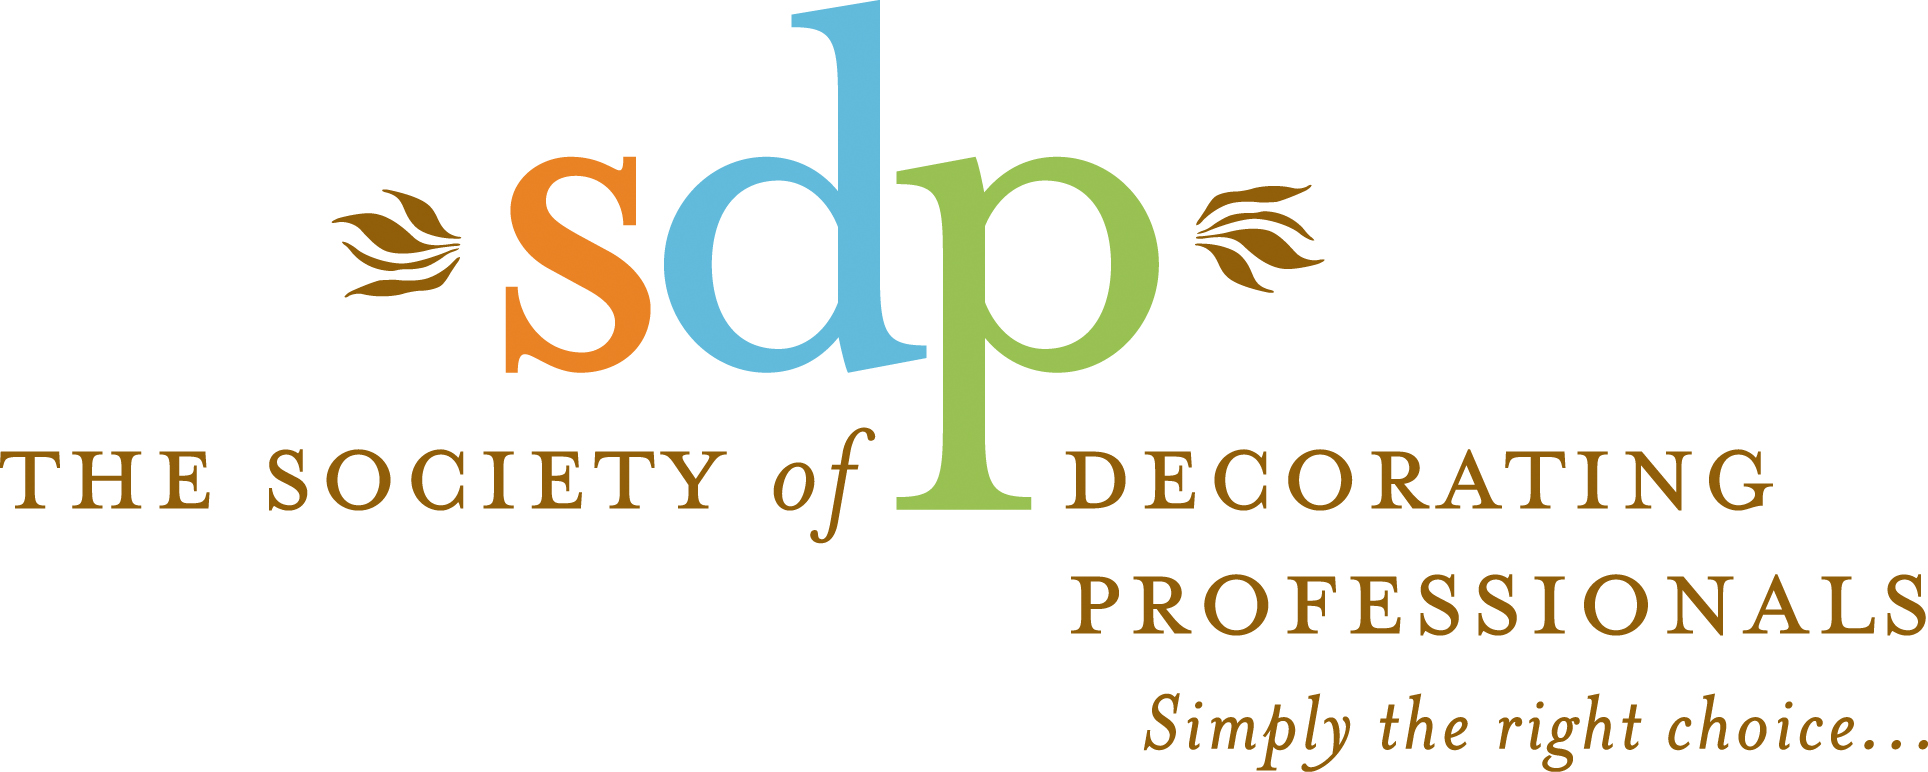 The Society of Decorating Professionals Logo